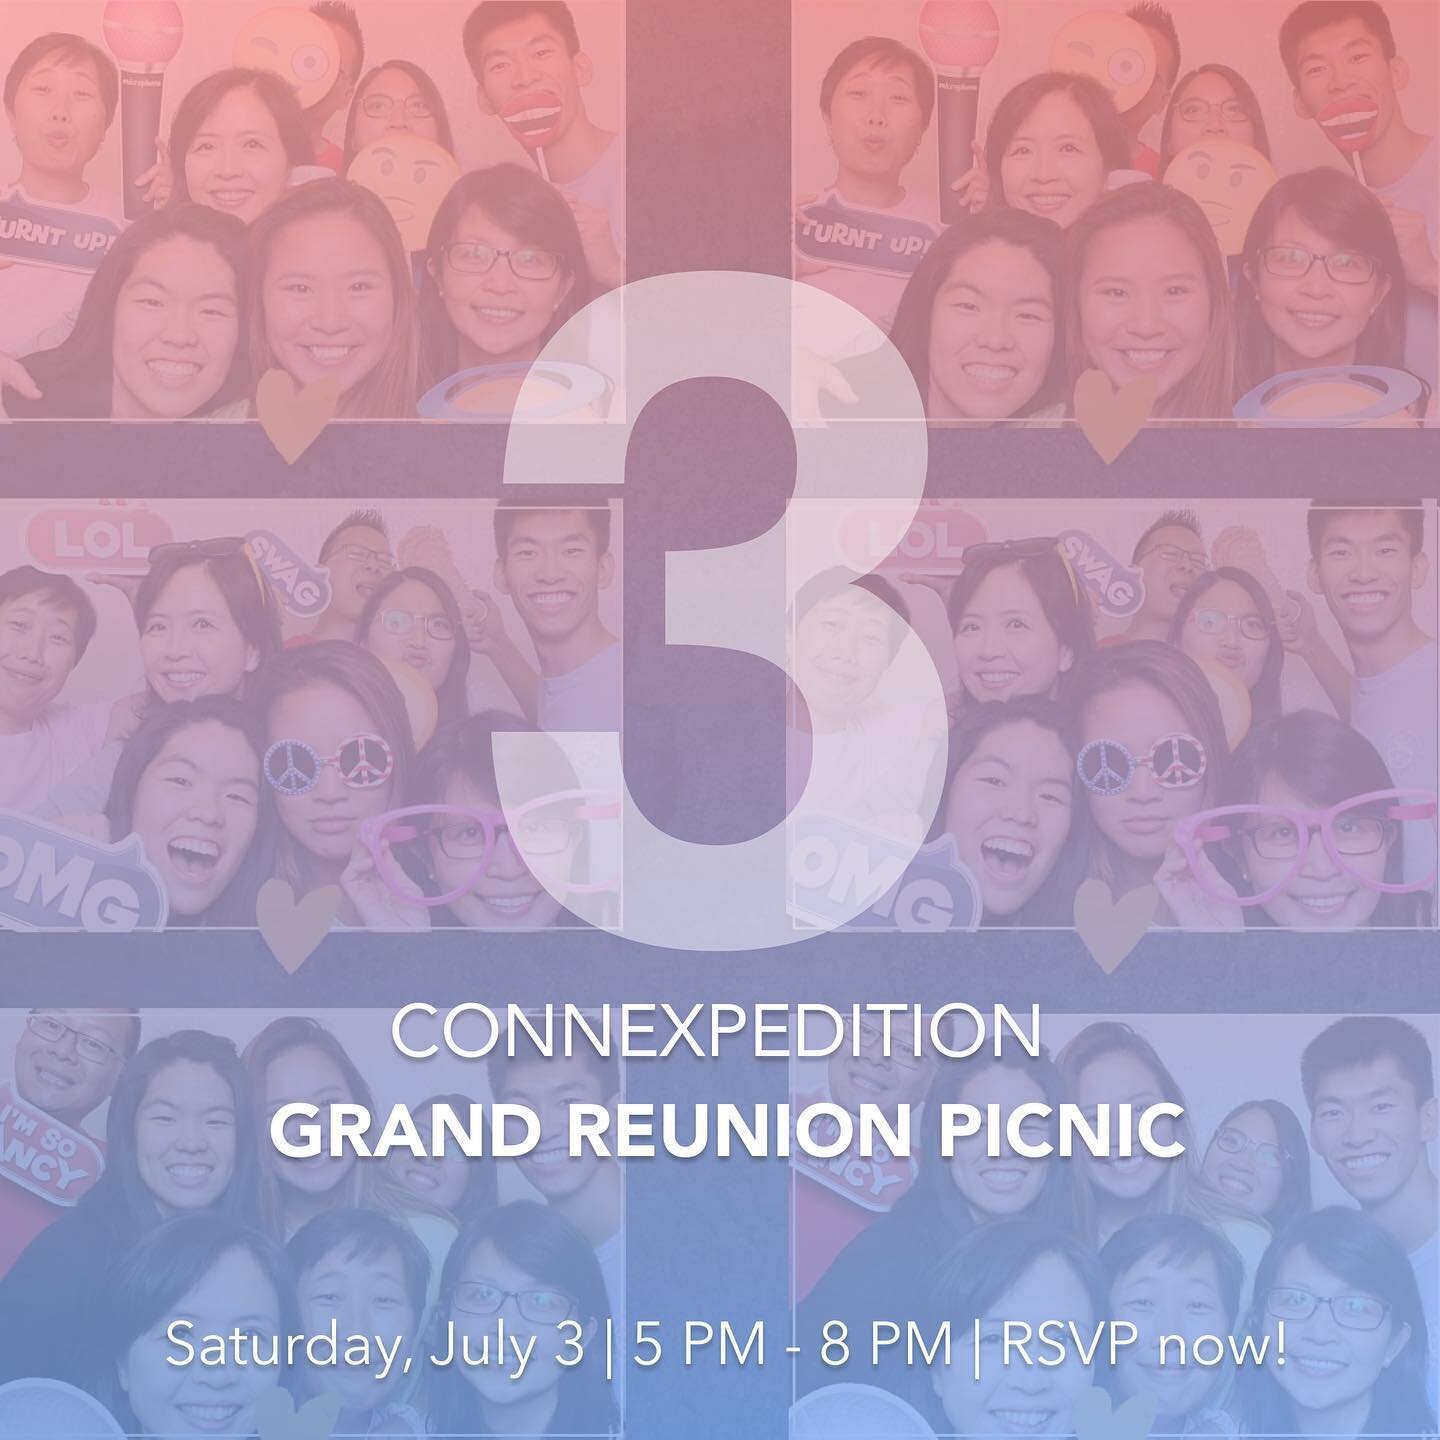 It&rsquo;s not just a reunion for members, but for our team leaders and staff too! Make sure to RSVP before Friday to catch up with what everyone&rsquo;s been up to! 

#connexpedition #community #grandreunion #sunsetpicnic